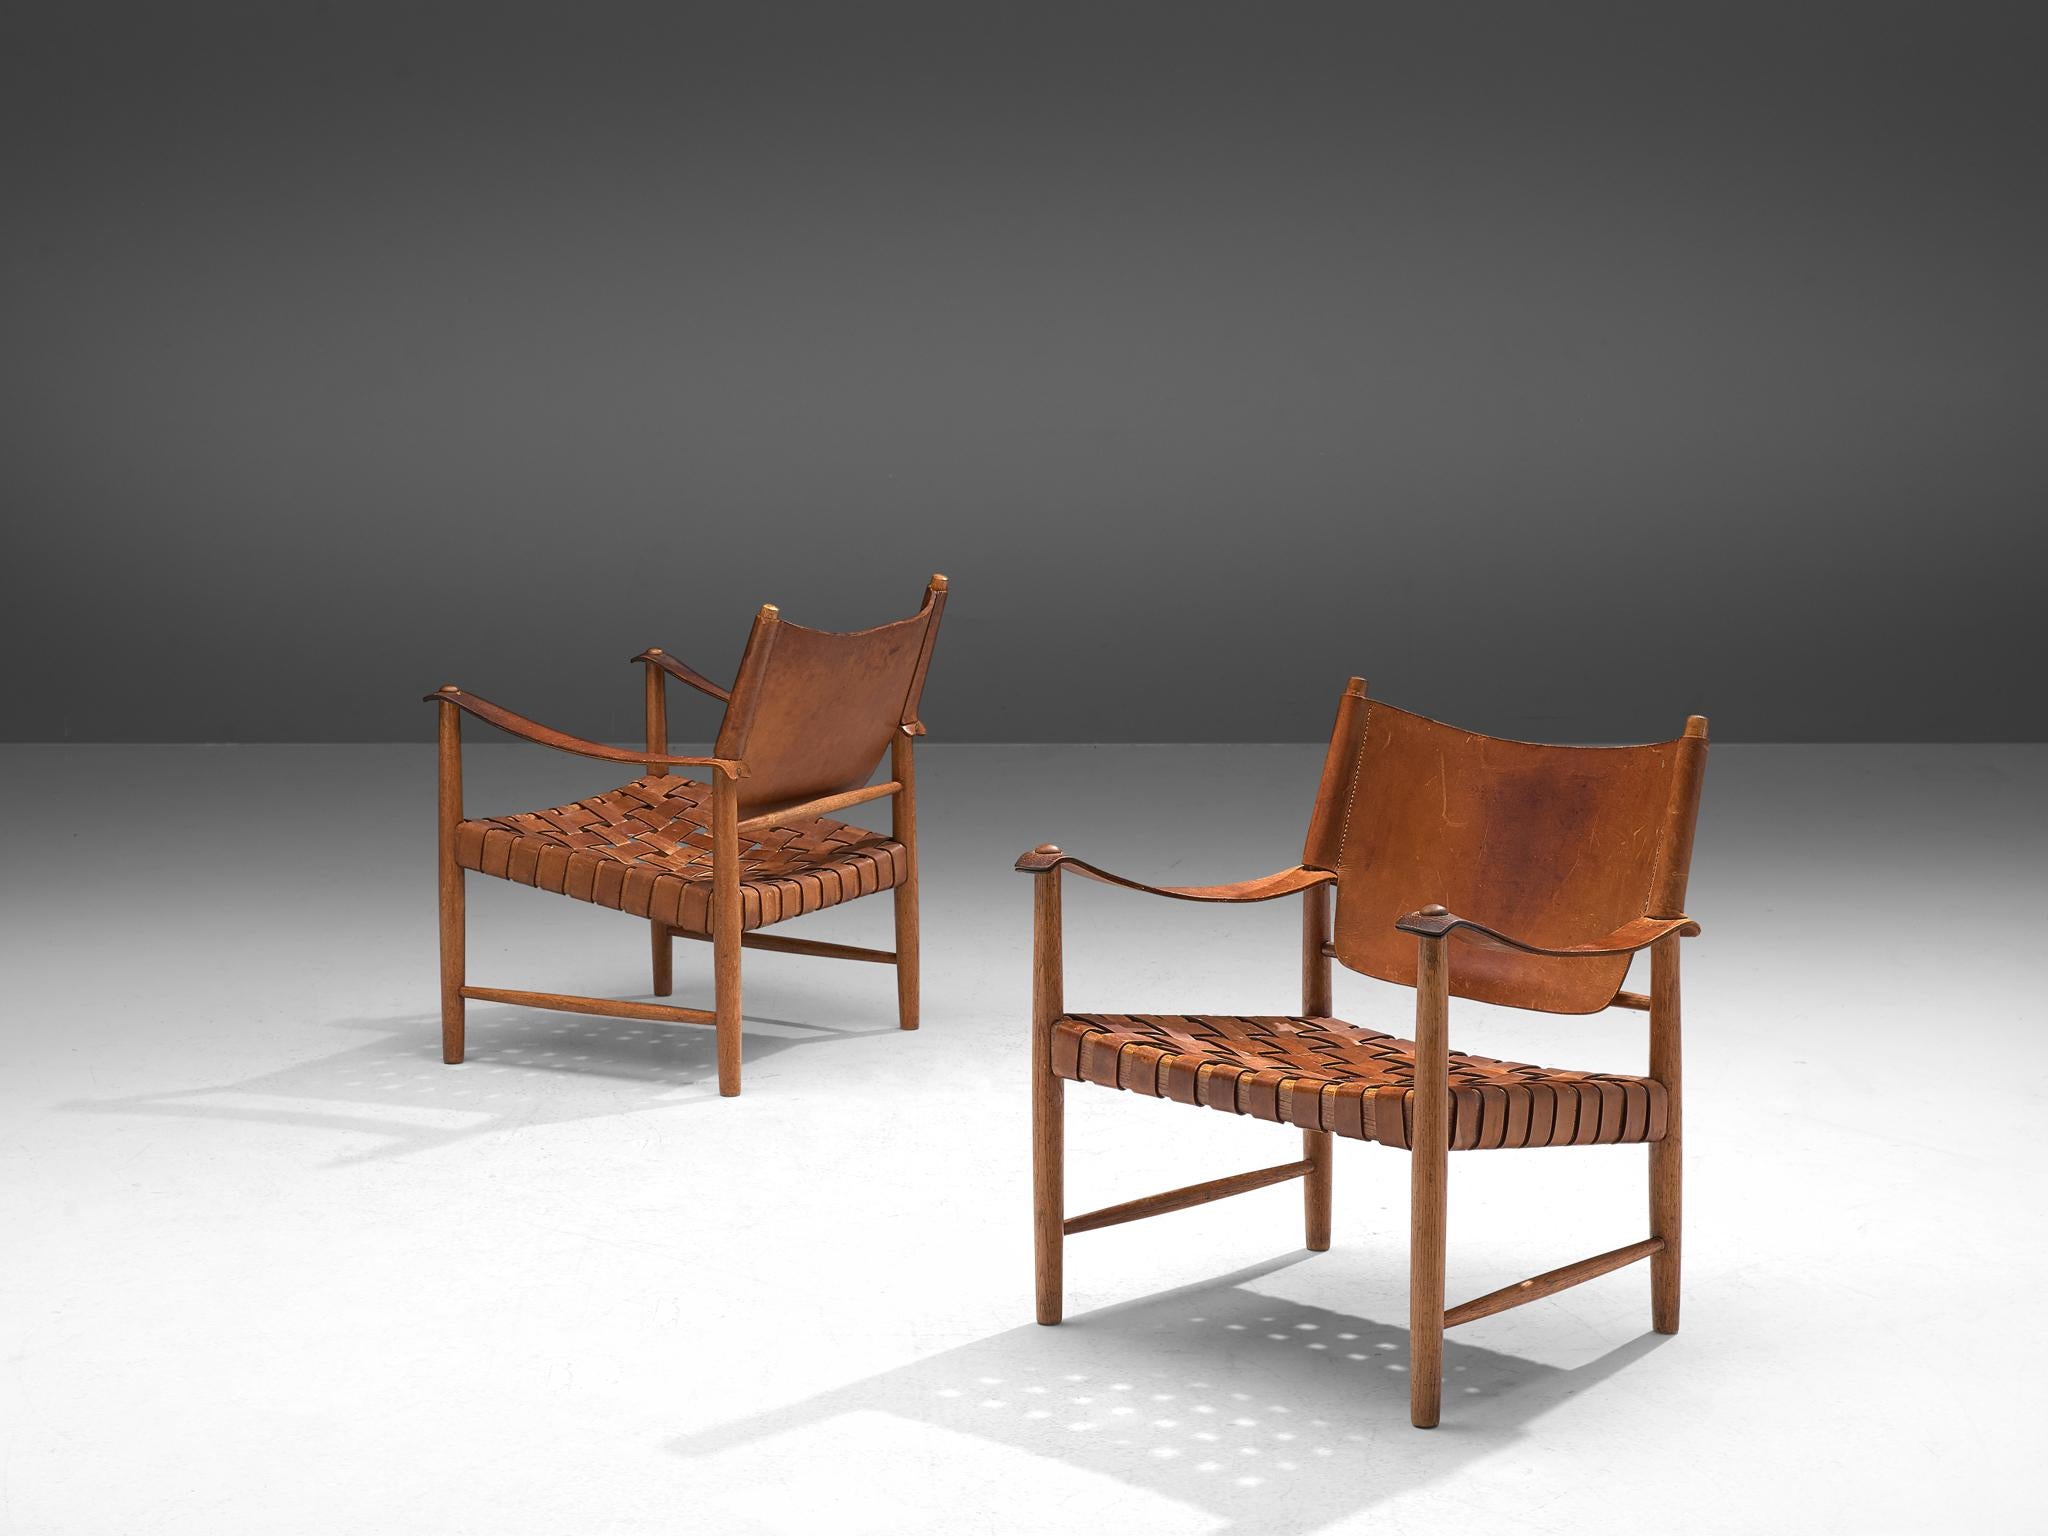 Safari chairs, patinated leather, beech, Denmark, 1950s. 

This elegant set safari chairs features wonderful patinated leather on both the seat, the arms and back. The patina creates a vibrant look which you can only achieve after years and years